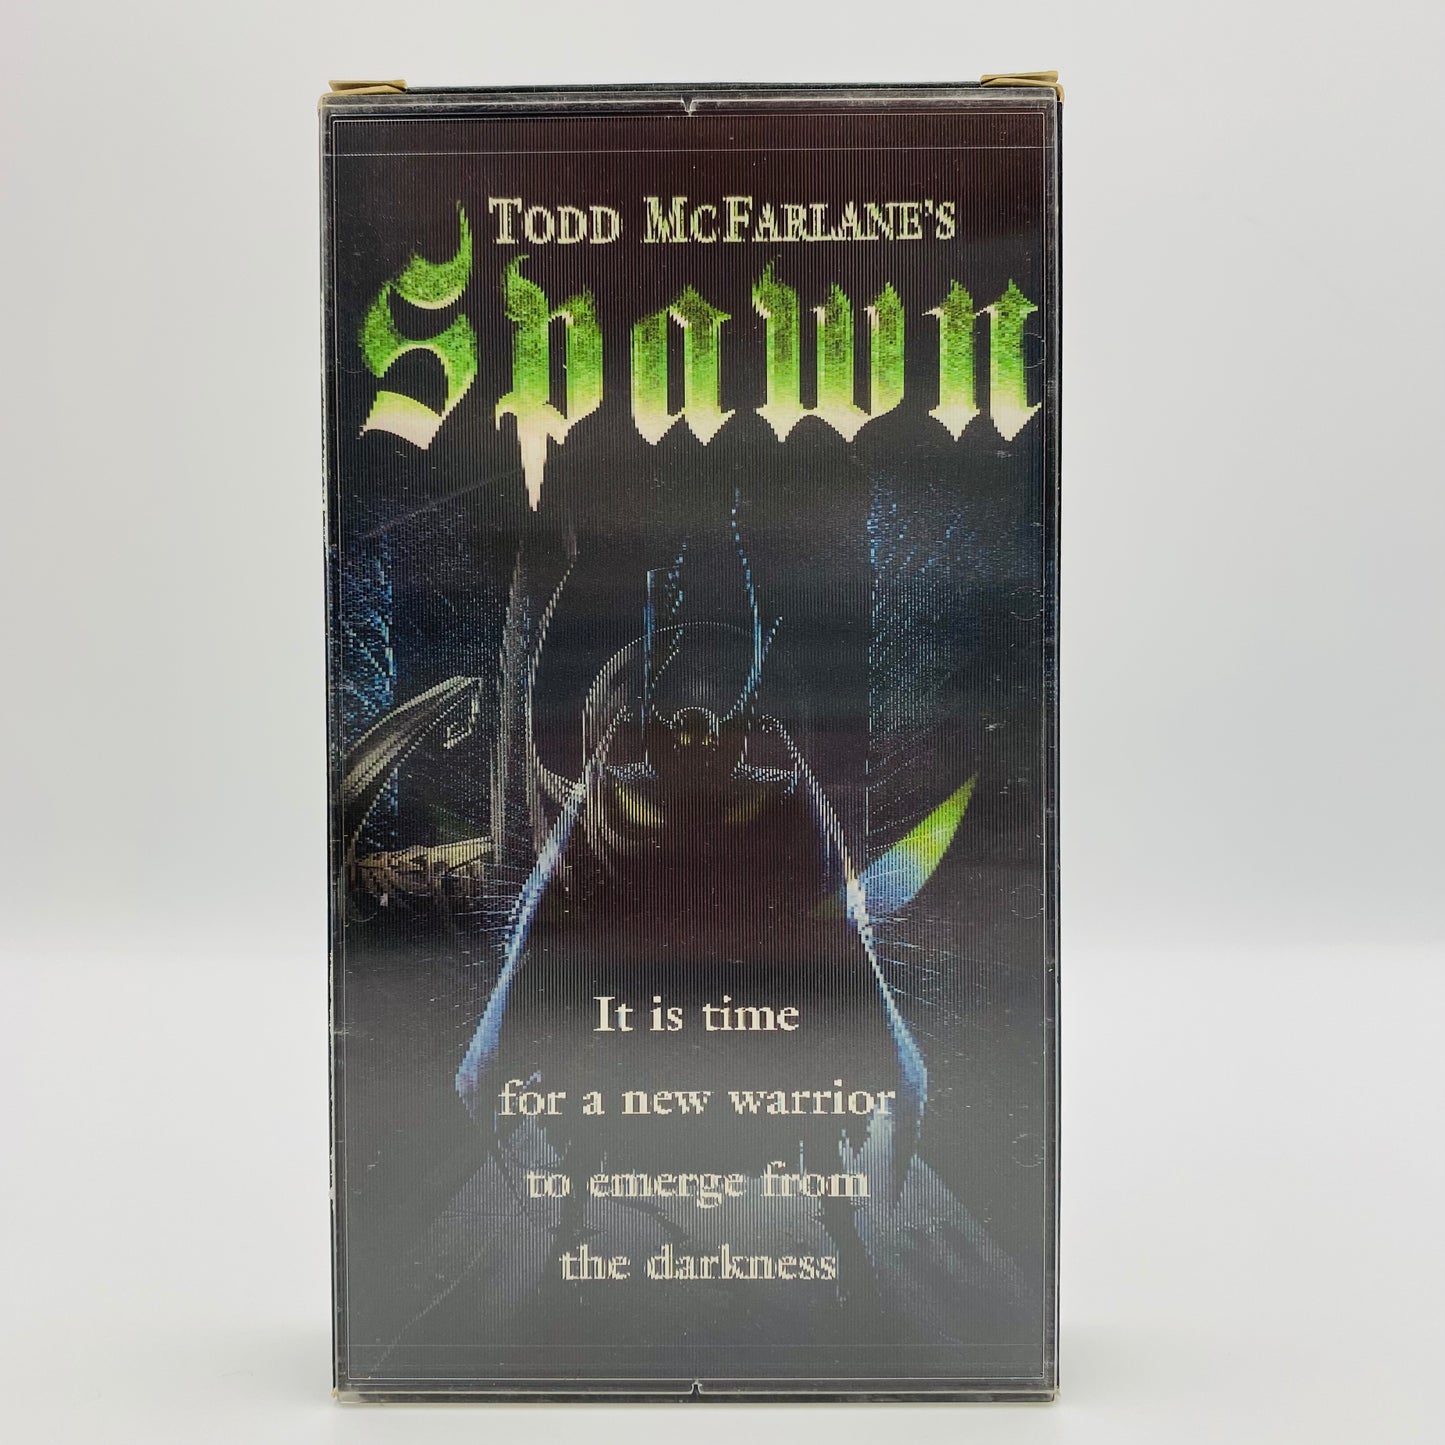 Spawn Animated volumes 1-3 VHS tapes (1997-1999) HBO Home Video